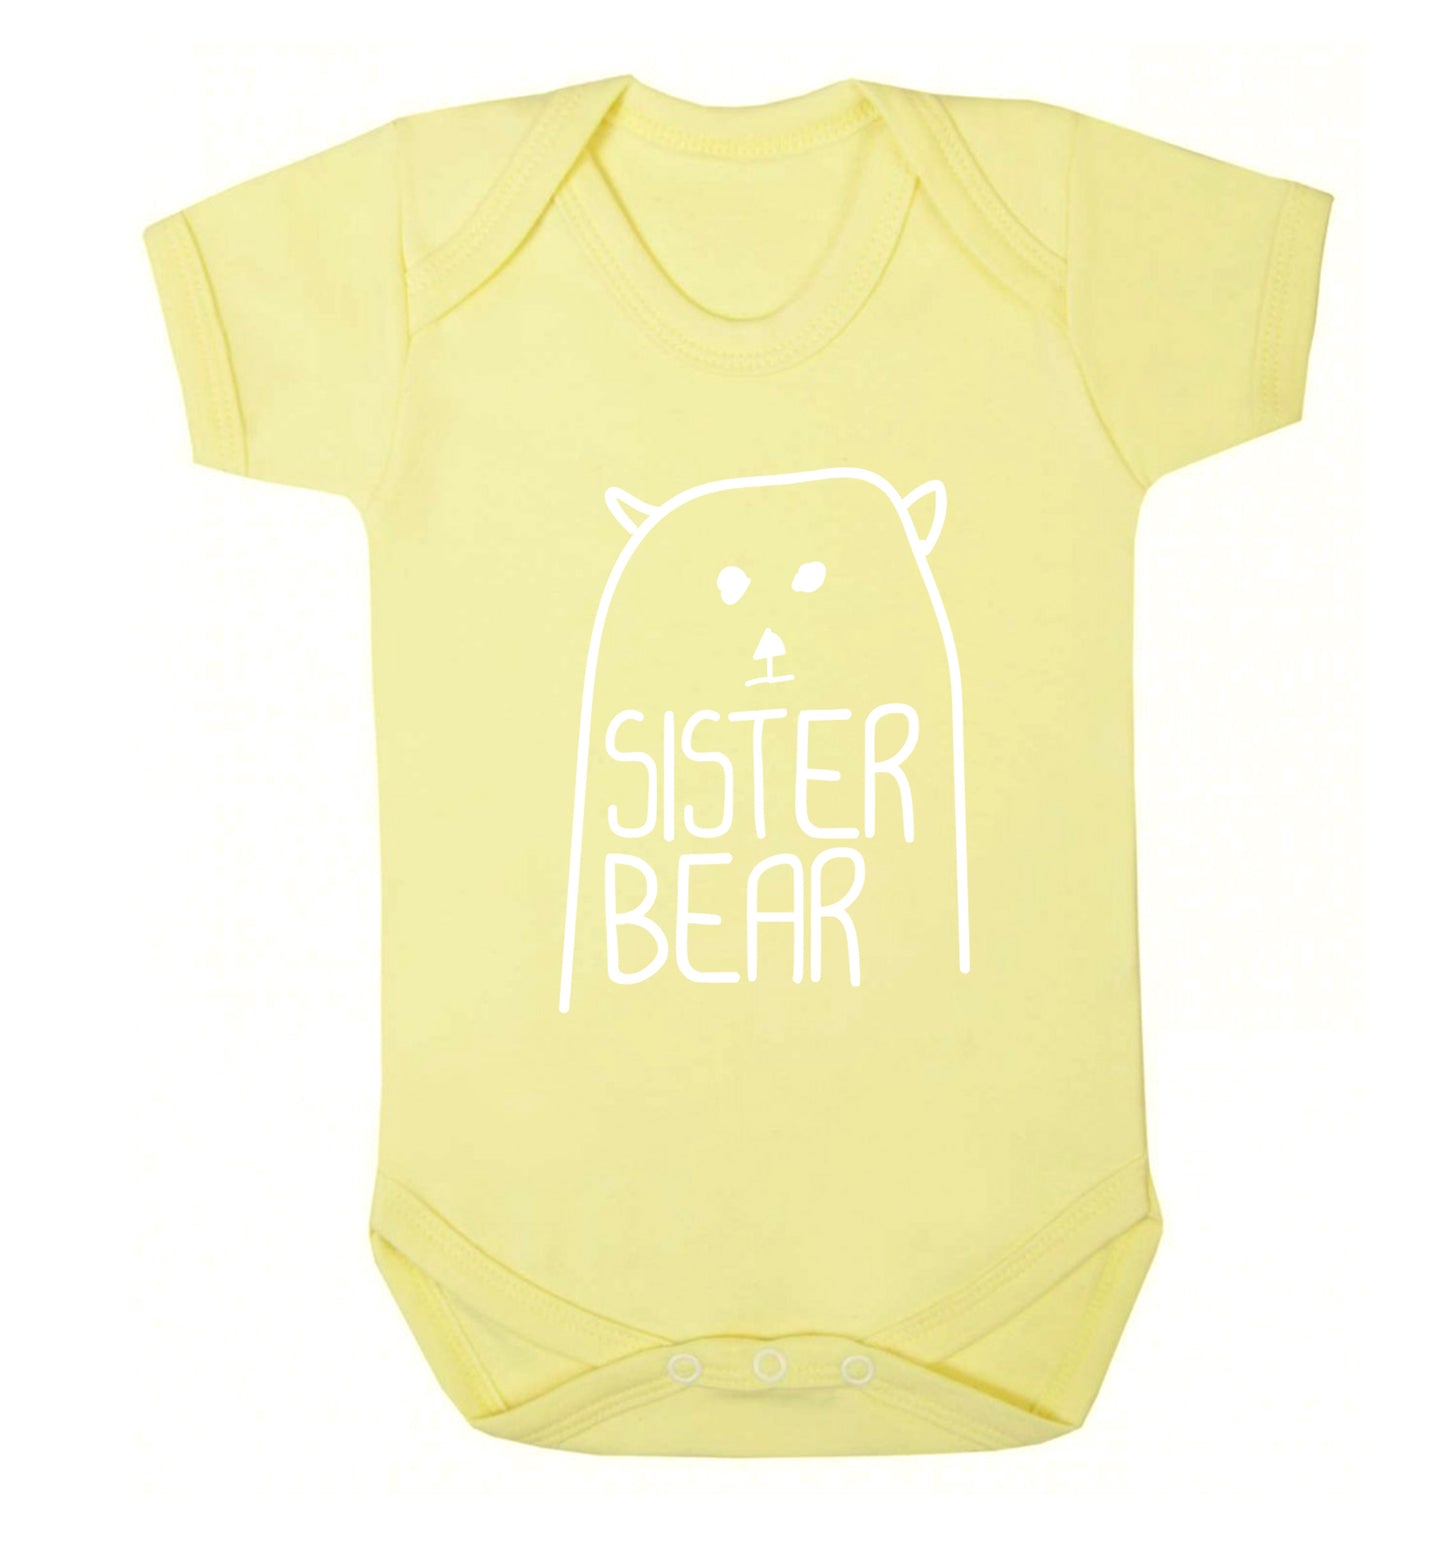 Sister bear Baby Vest pale yellow 18-24 months